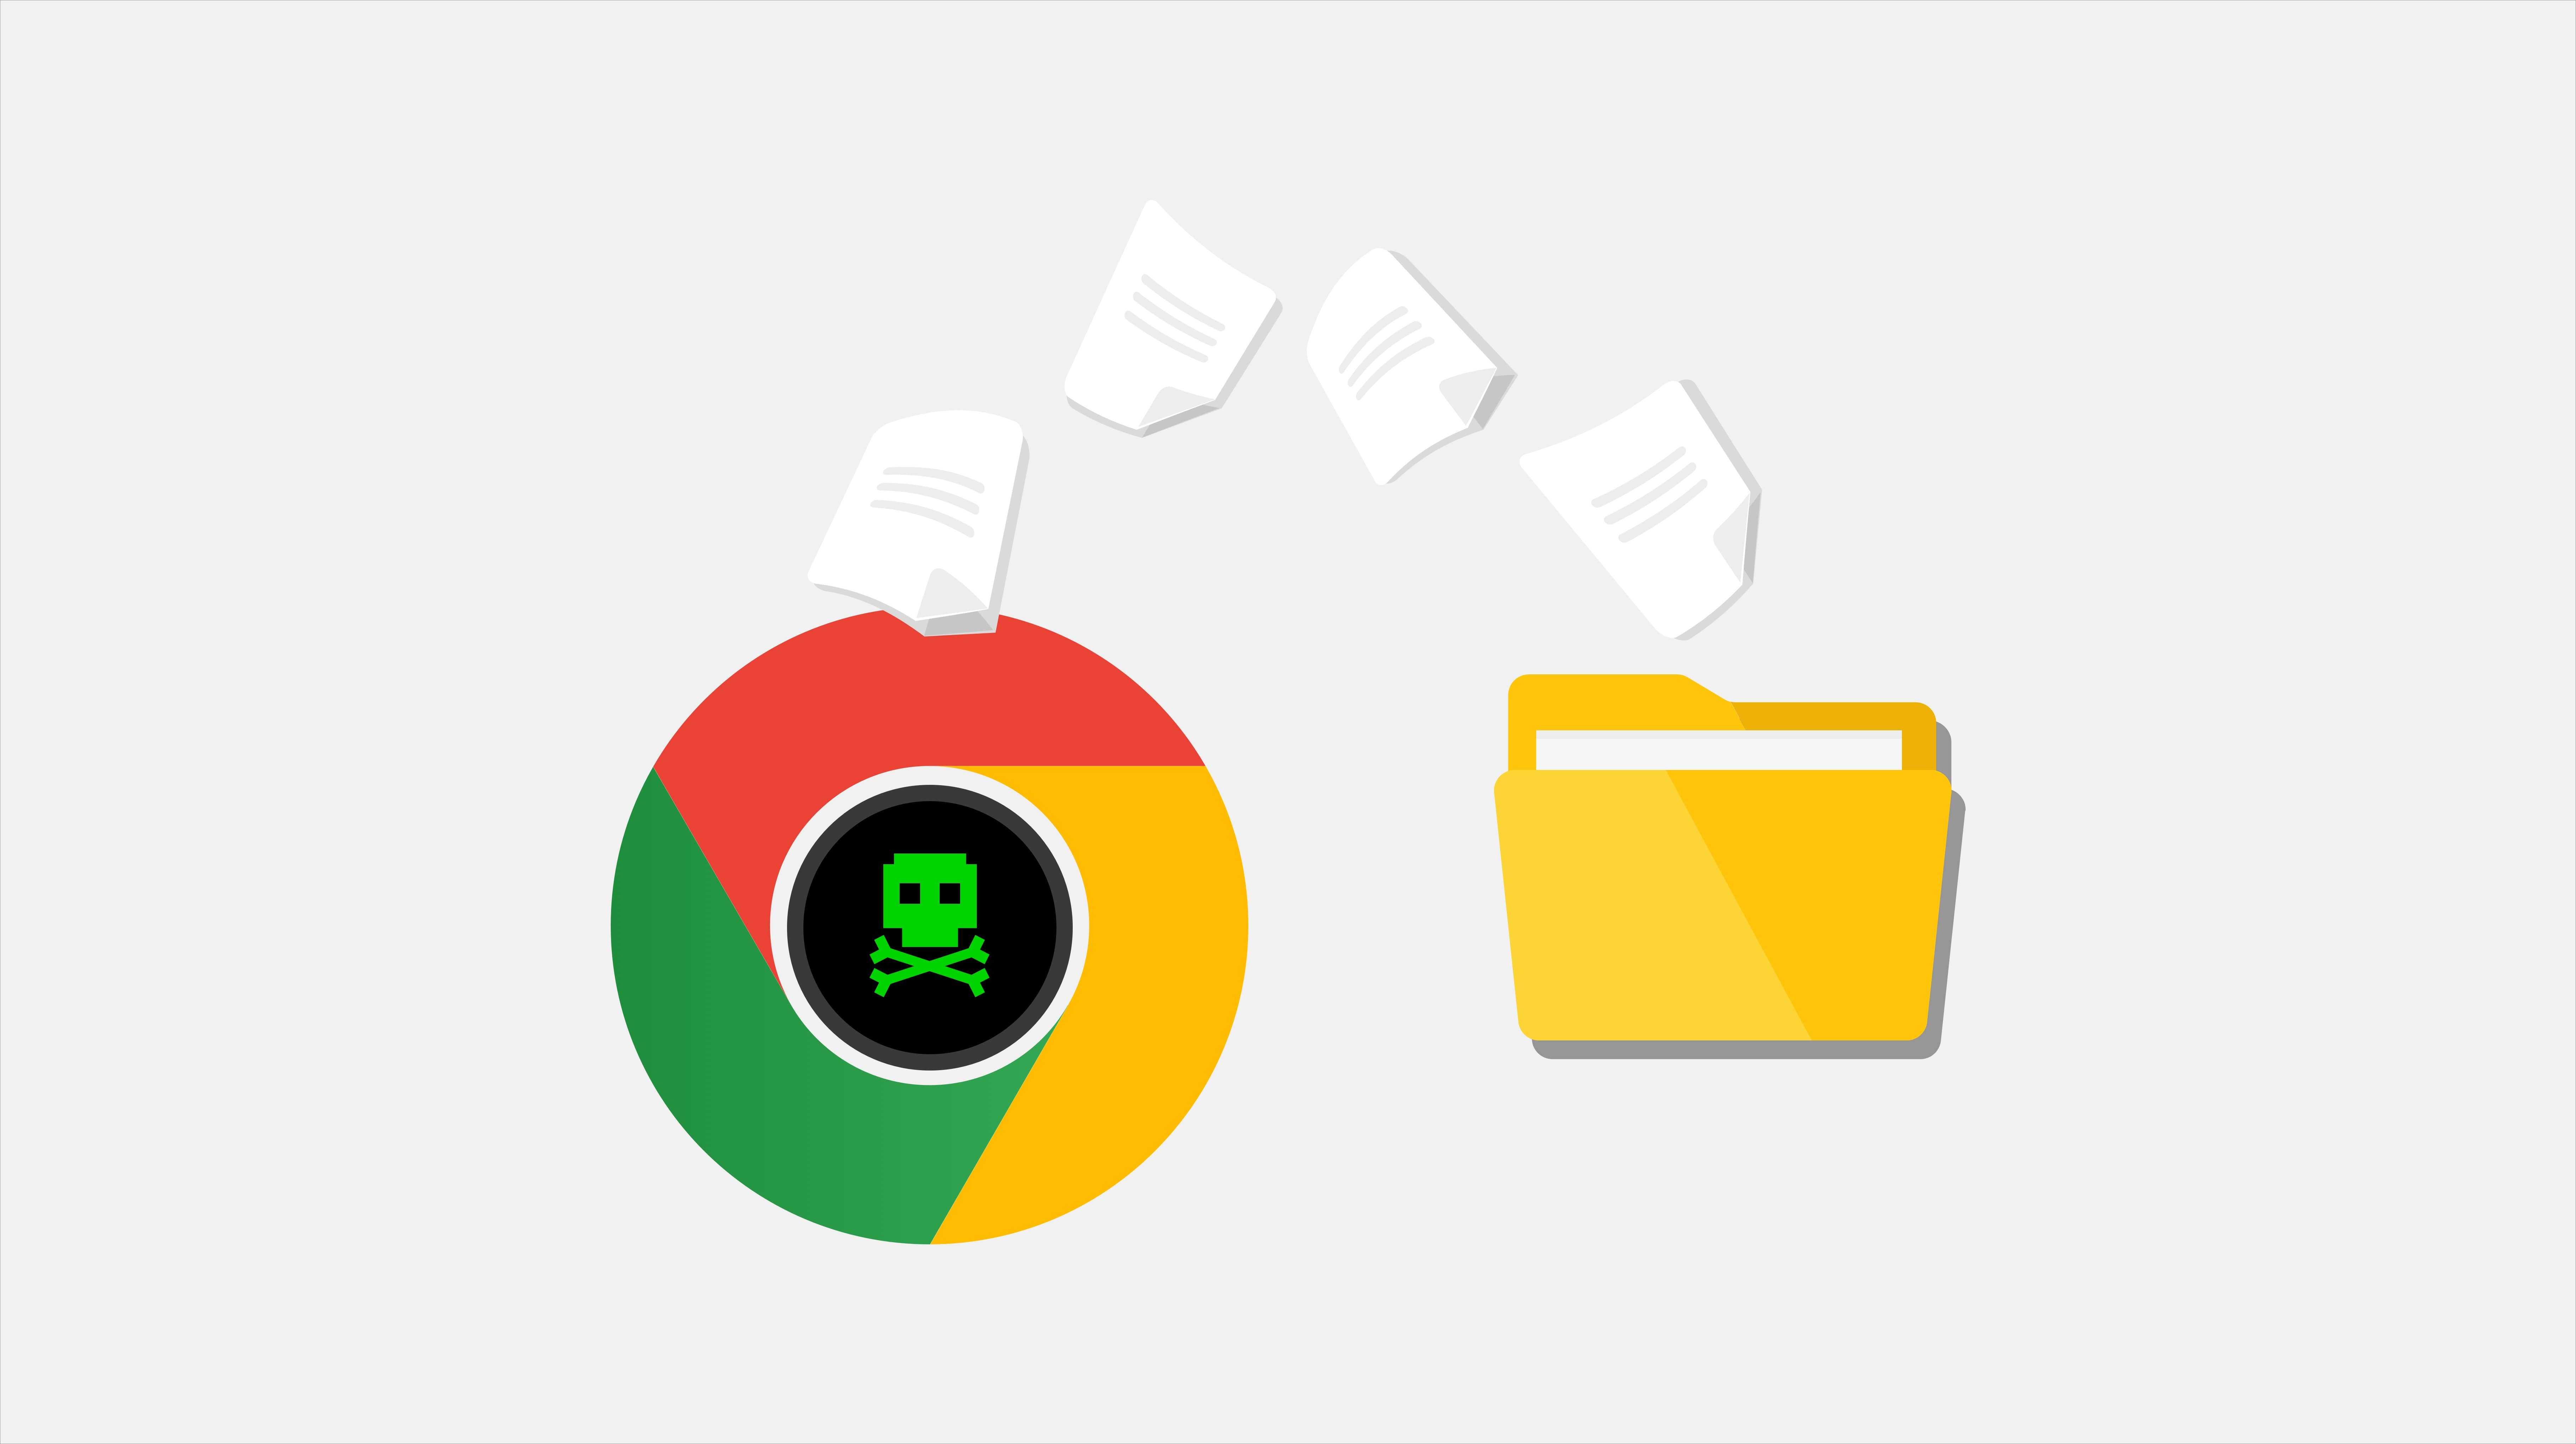 Google Chrome “SymStealer” Vulnerability: How to Protect Your Files from Being Stolen